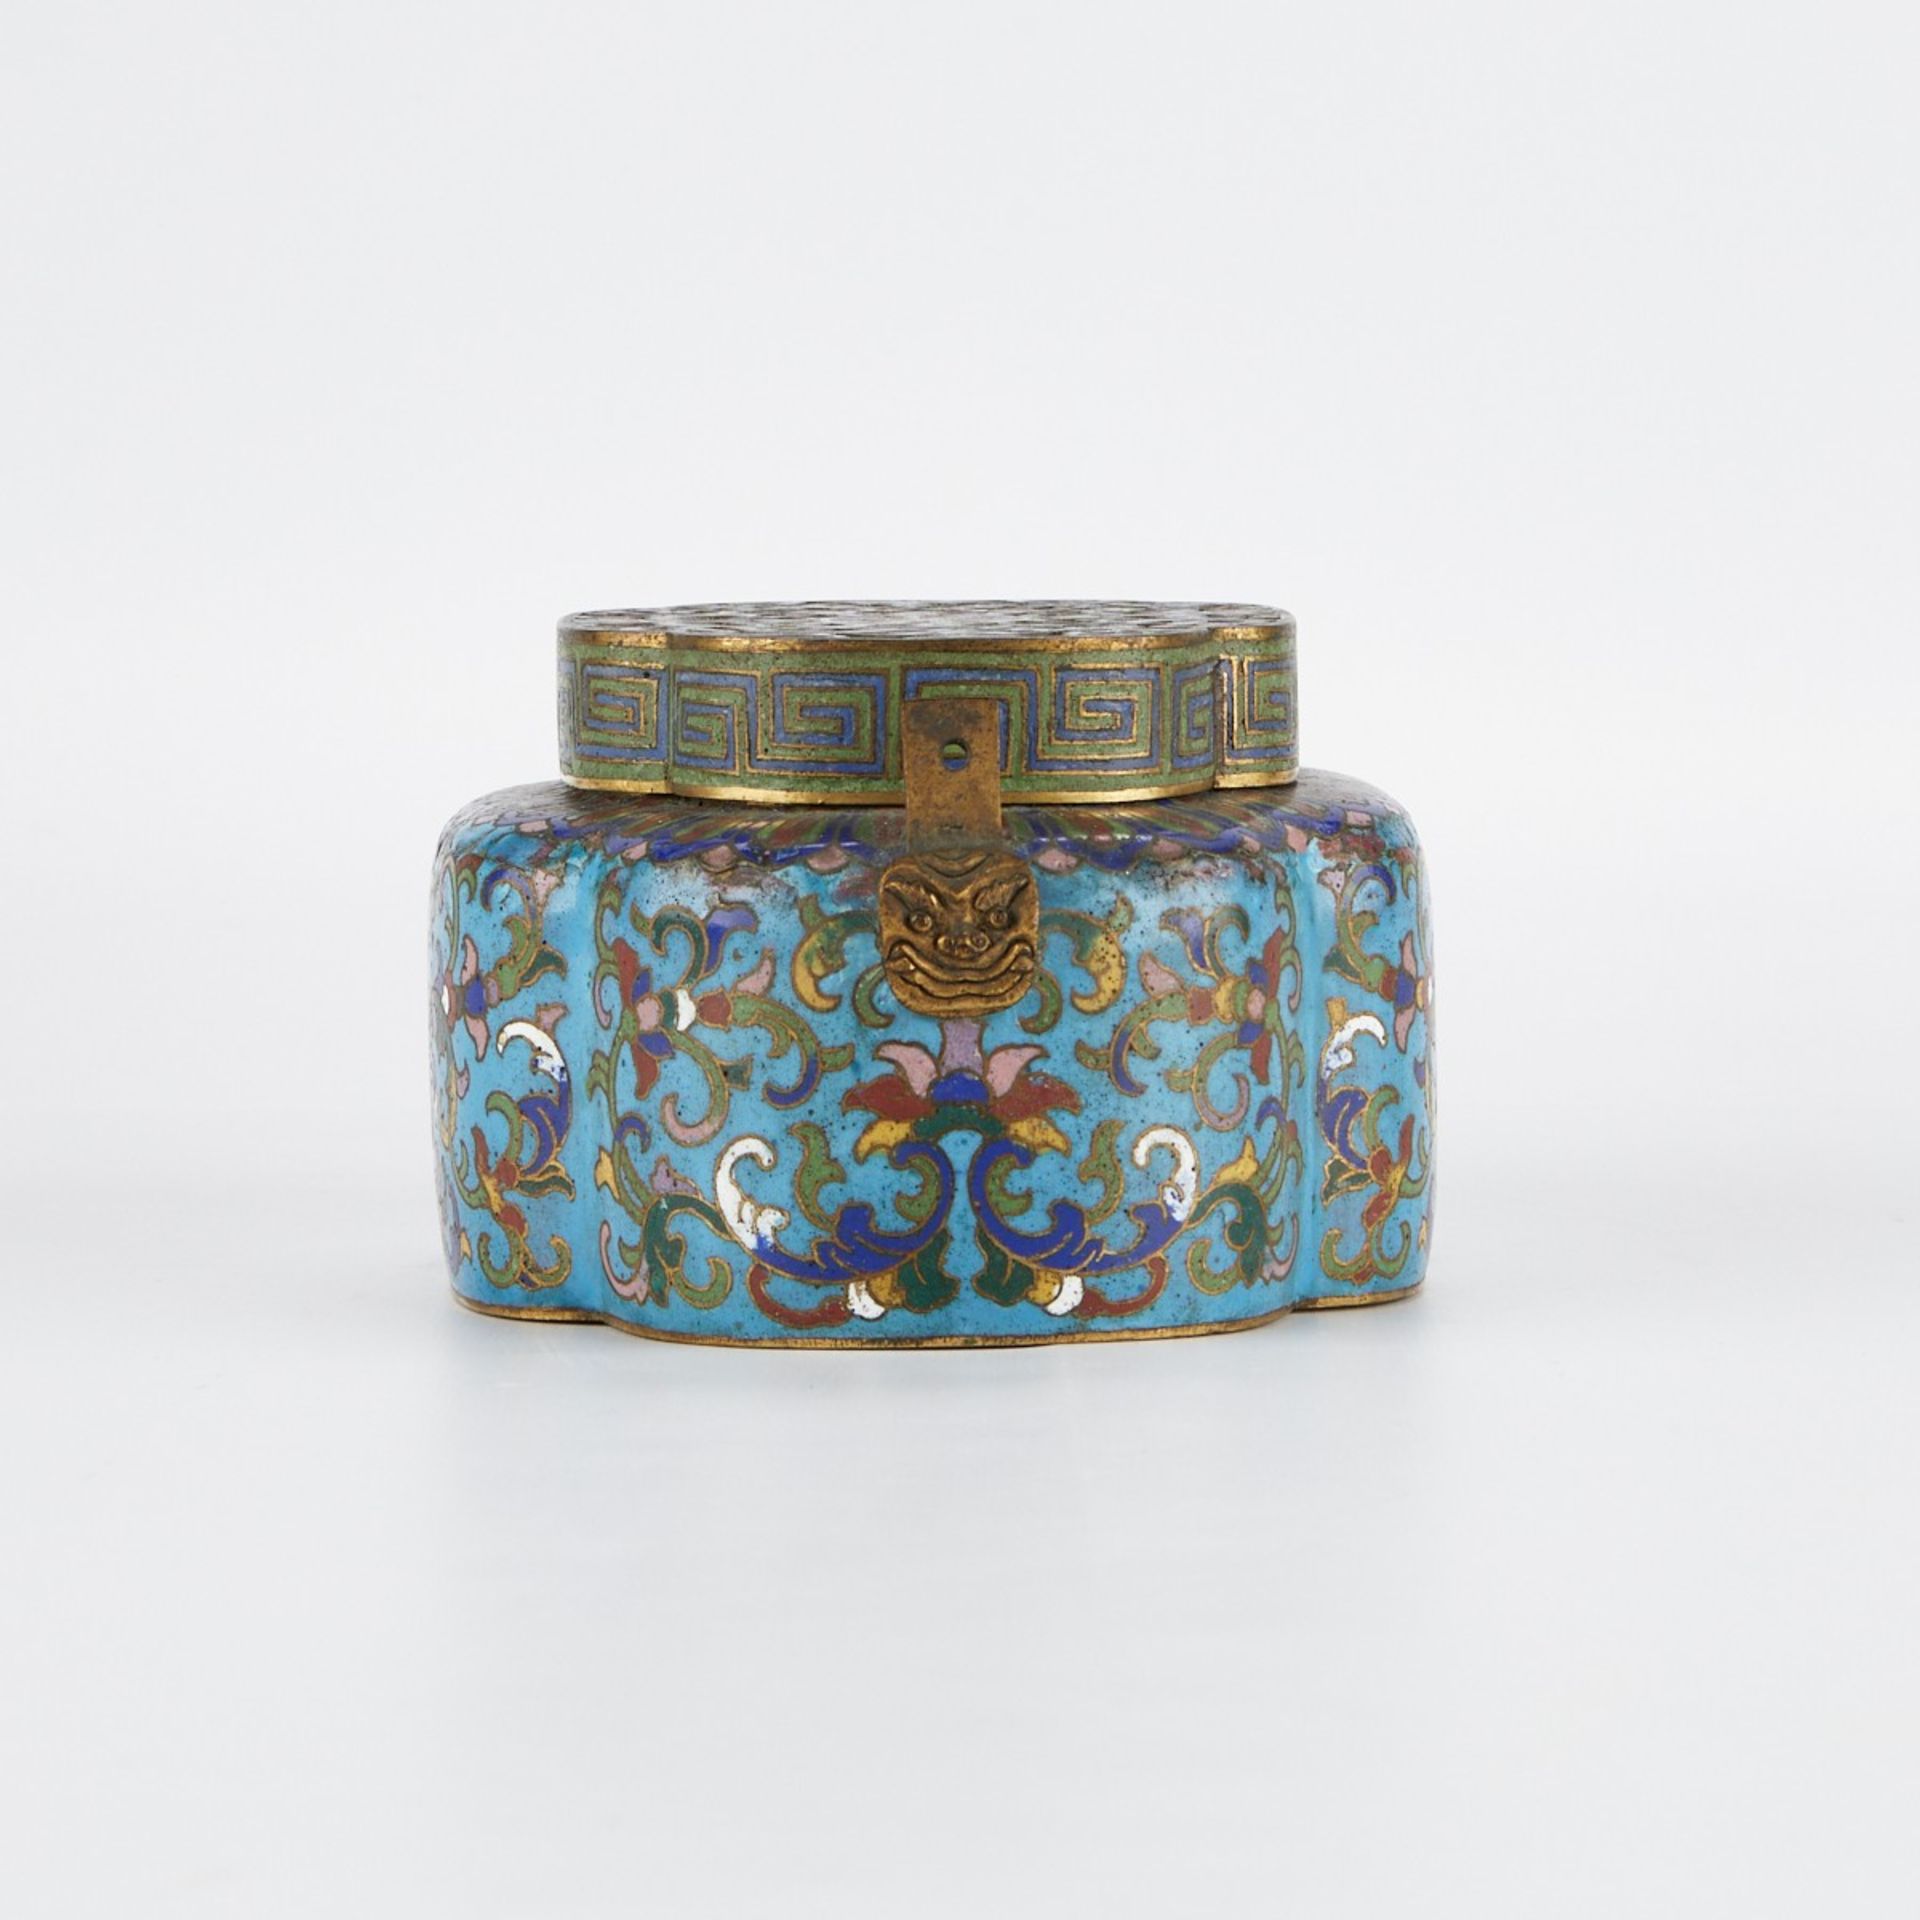 18th c. Chinese Cloisonne Hand Warmer - Image 5 of 9